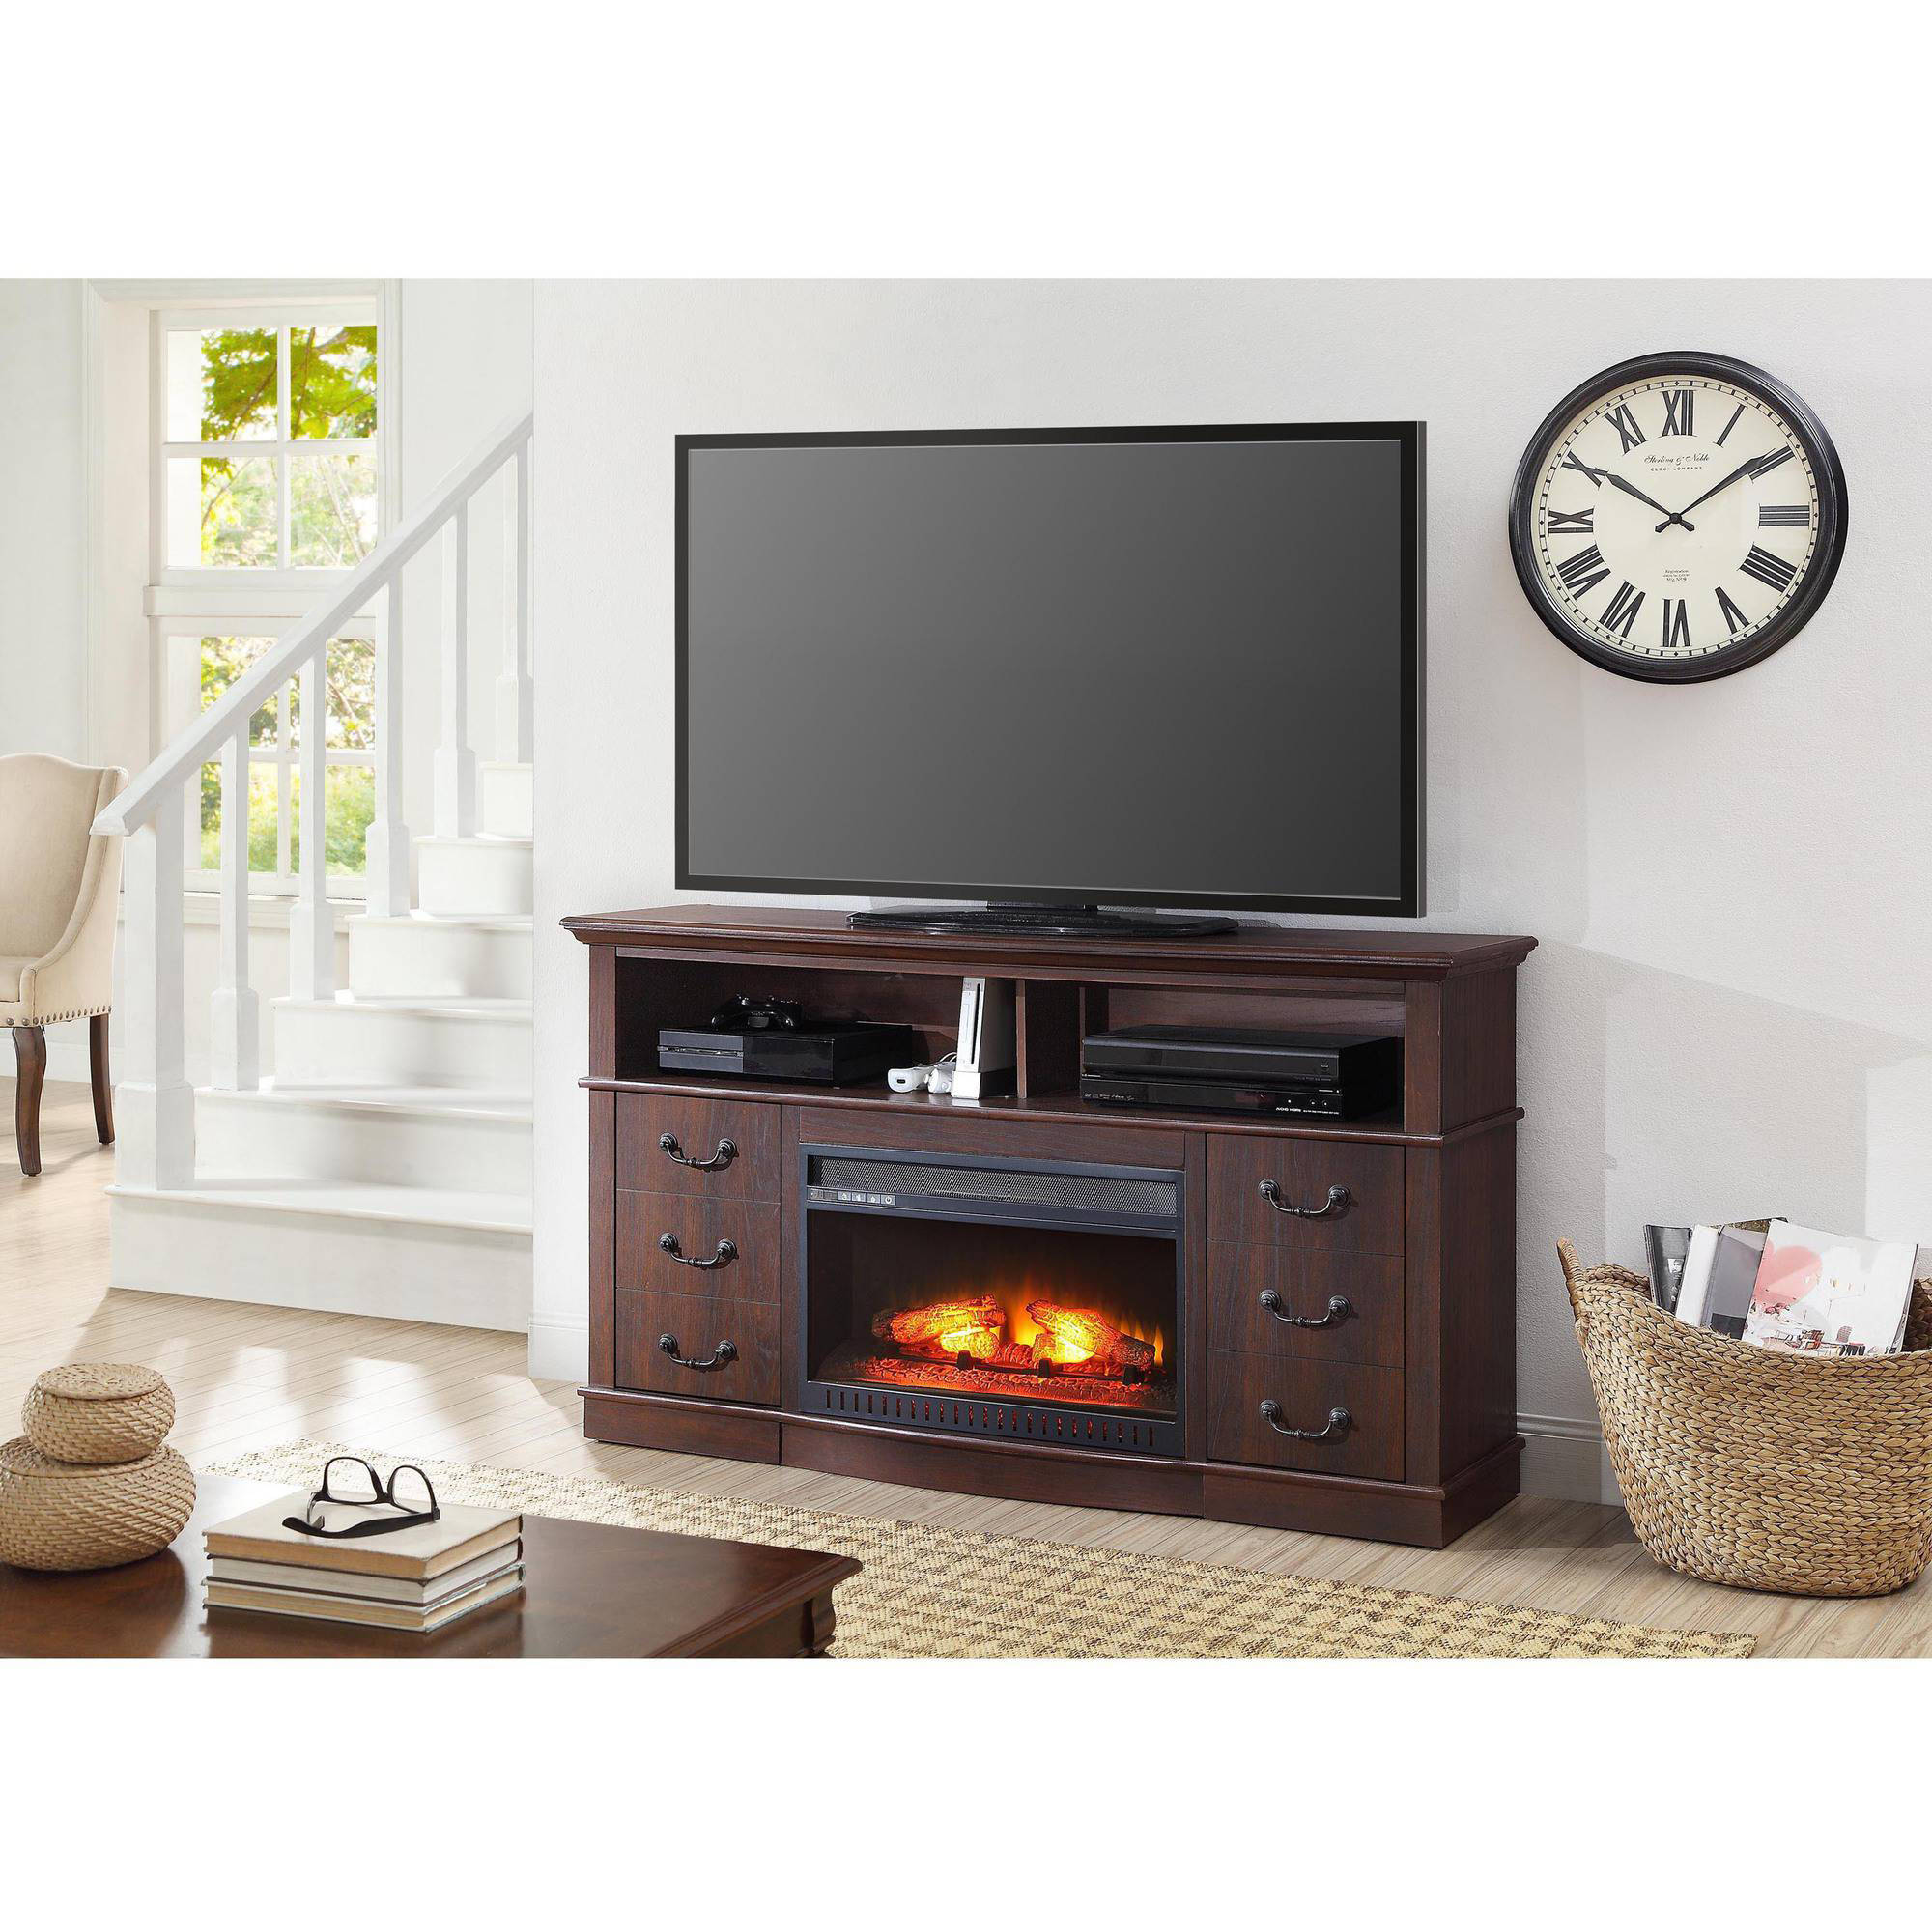 Better Homes & Gardens Media Fireplace Console for TVs up to 70" - image 1 of 6